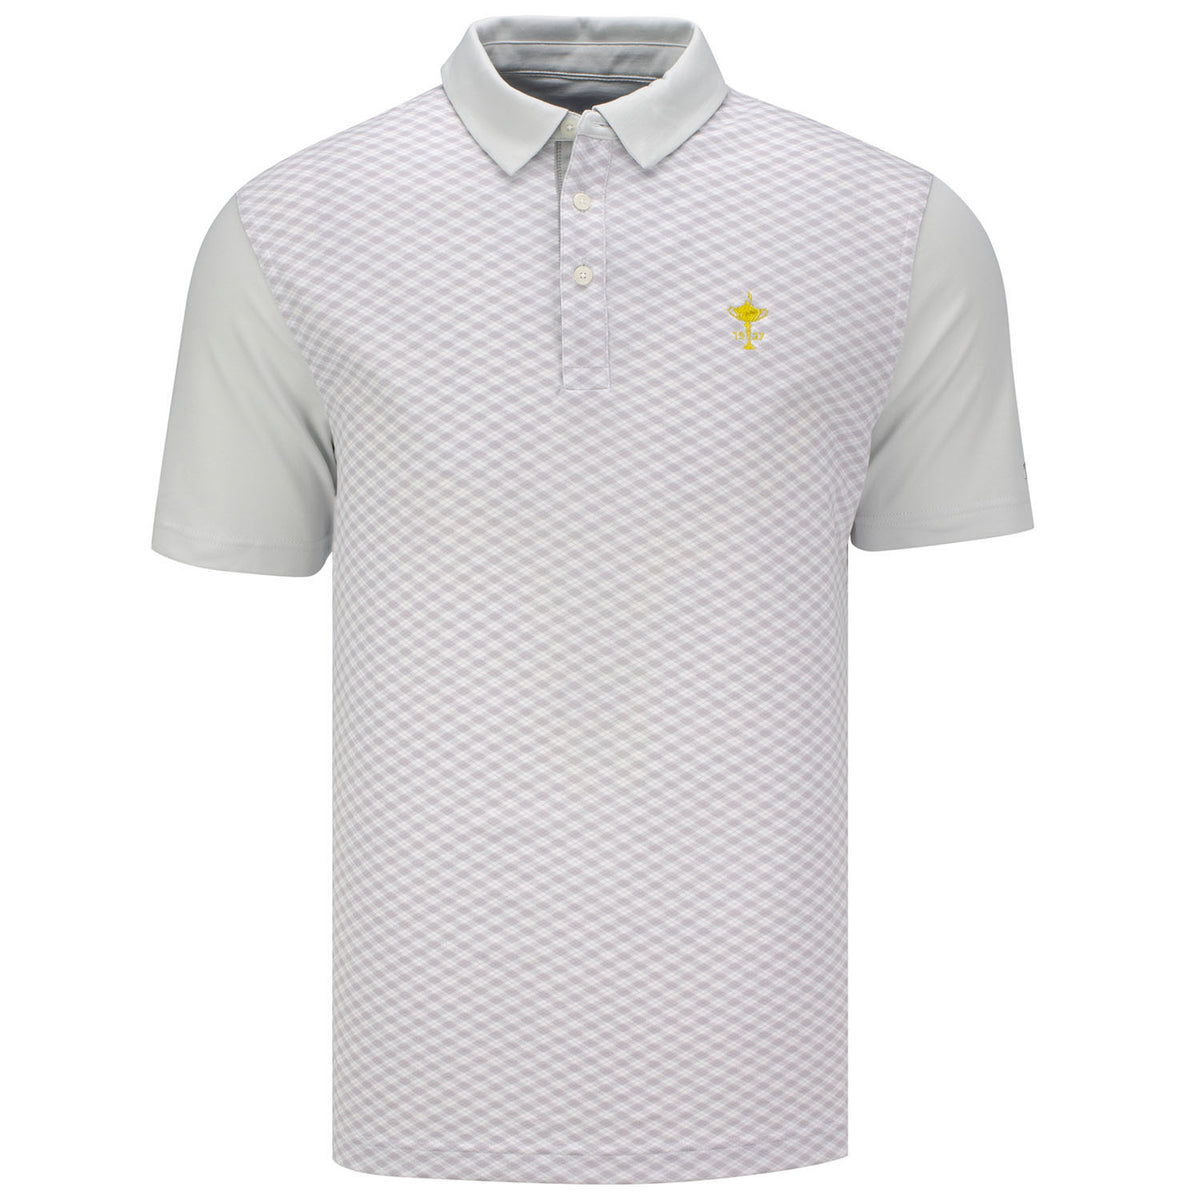 Nike Player Dri-Fit Print Polo in White- Front VIew